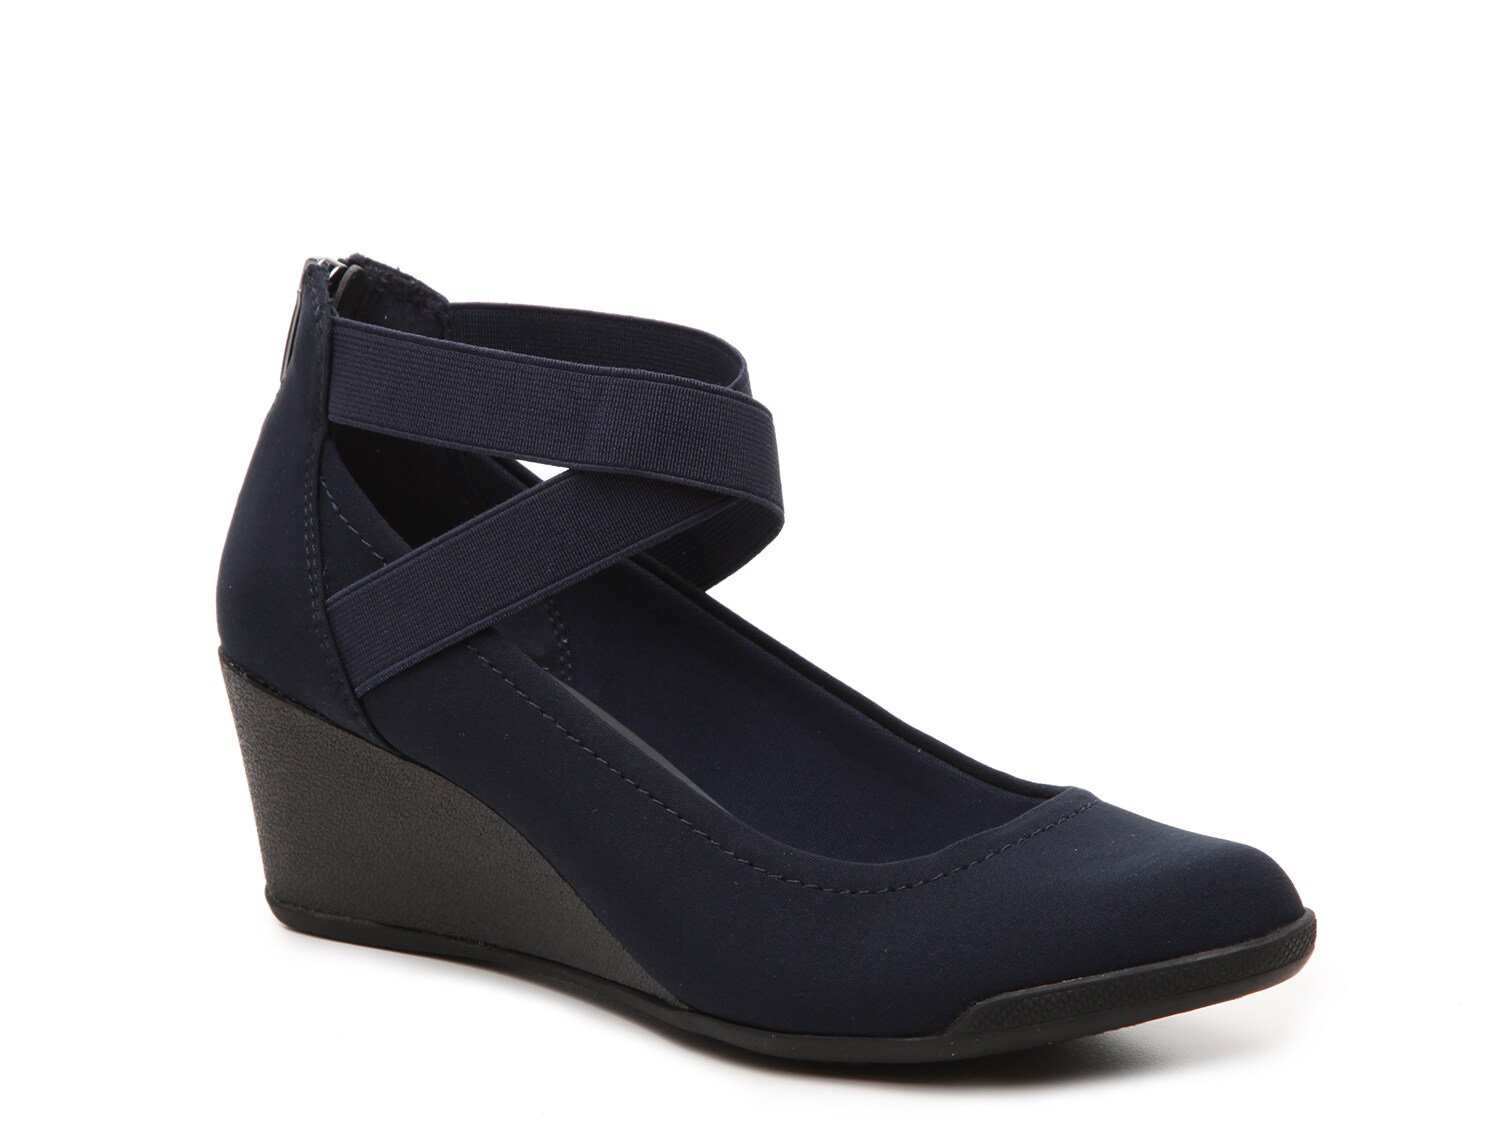 anne klein ankle strap shoes